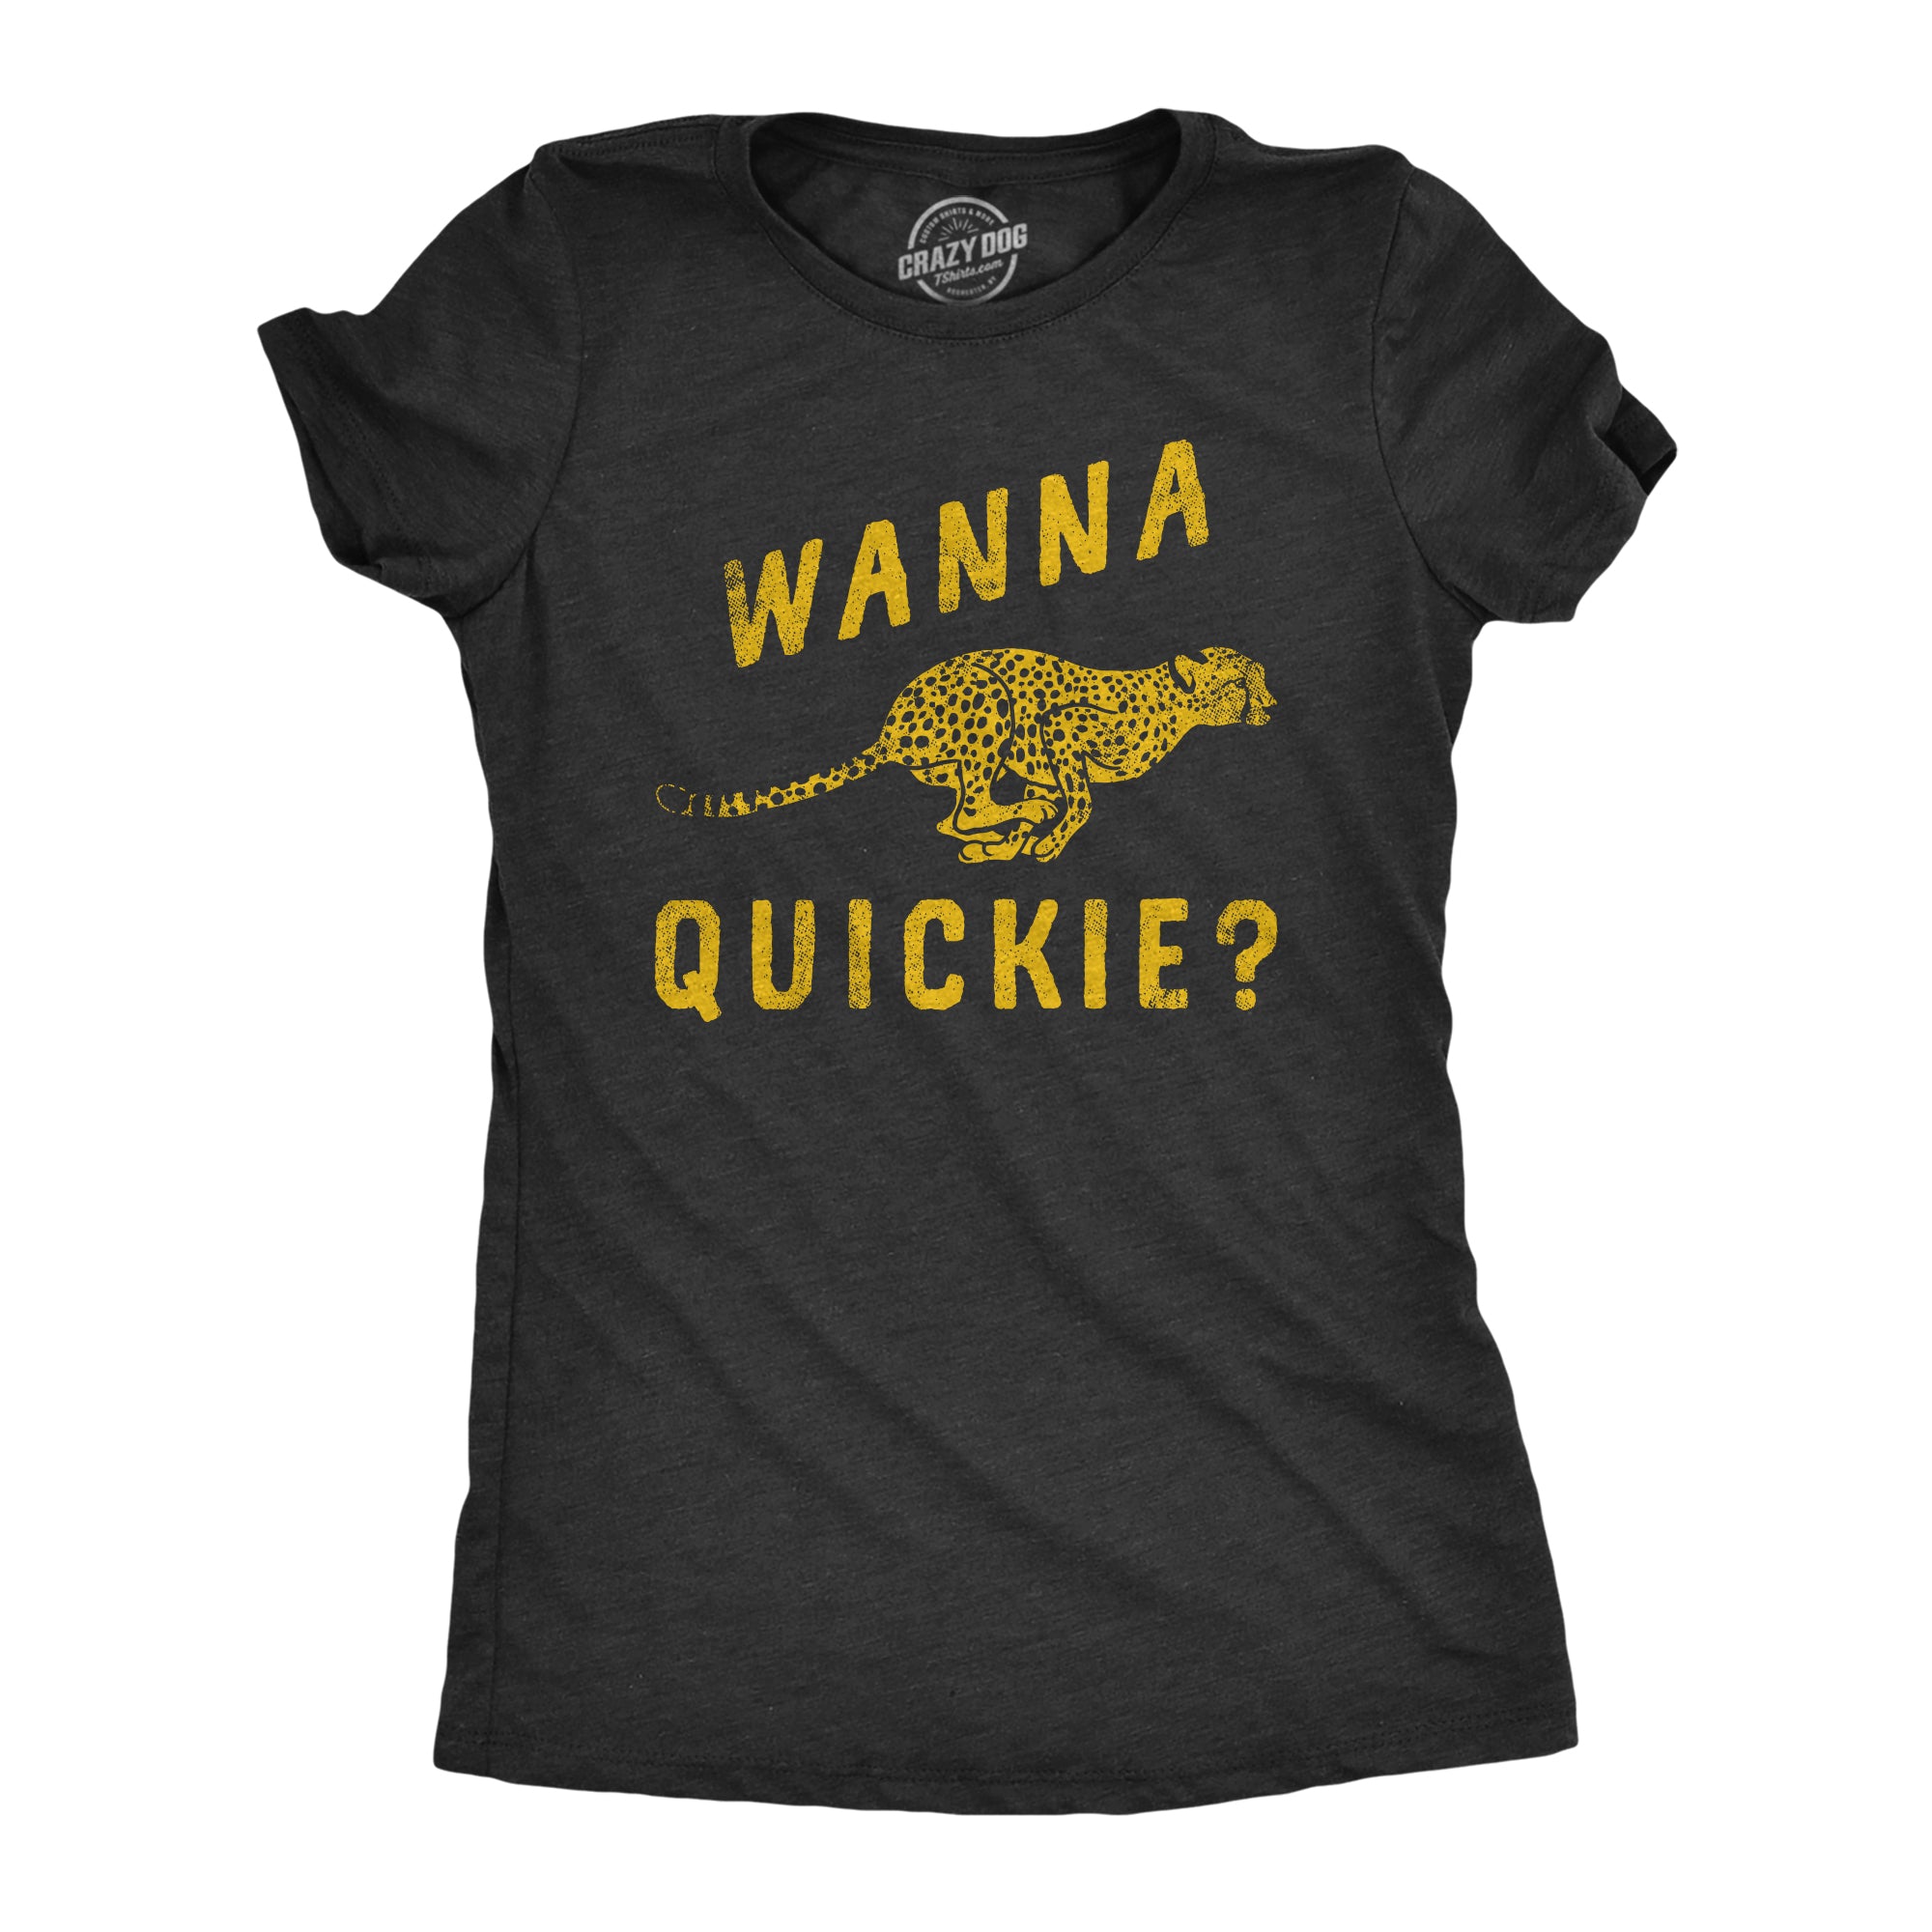 Funny Heather Black - QUICKIE Wanna Quickie Womens T Shirt Nerdy Sex sarcastic Tee